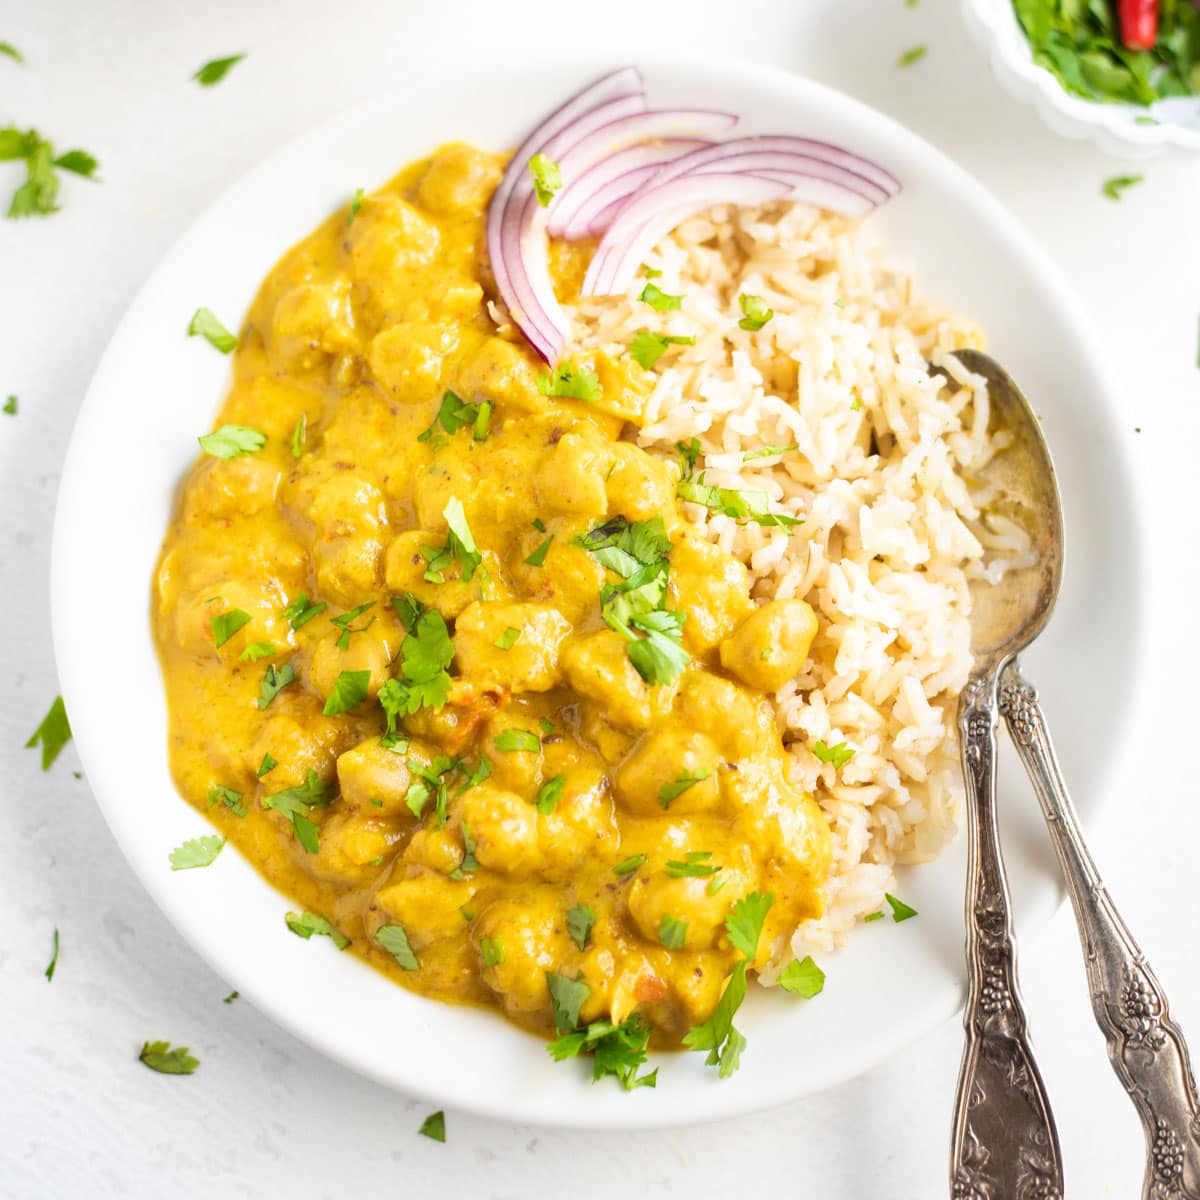 https://pipingpotcurry.com/wp-content/uploads/2023/04/Indian-Chickpea-Curry-with-Coconut-Mik-Piping-Pot-Curry-1.jpg